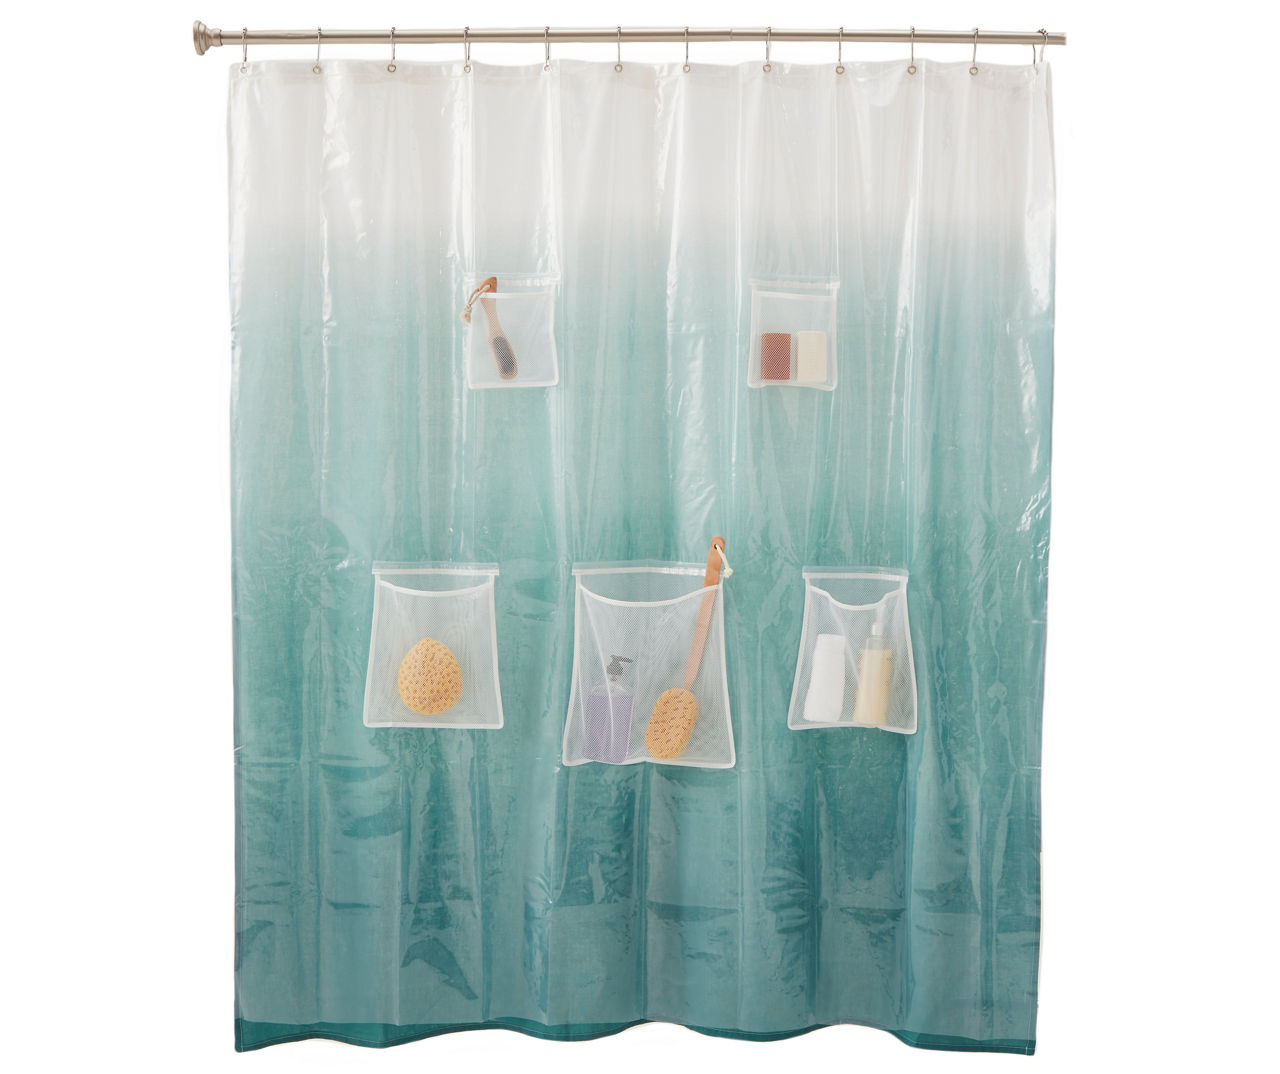 Super Clear Pockets PEVA Shower Curtain Liner with 9 Mesh Storage Pockets 